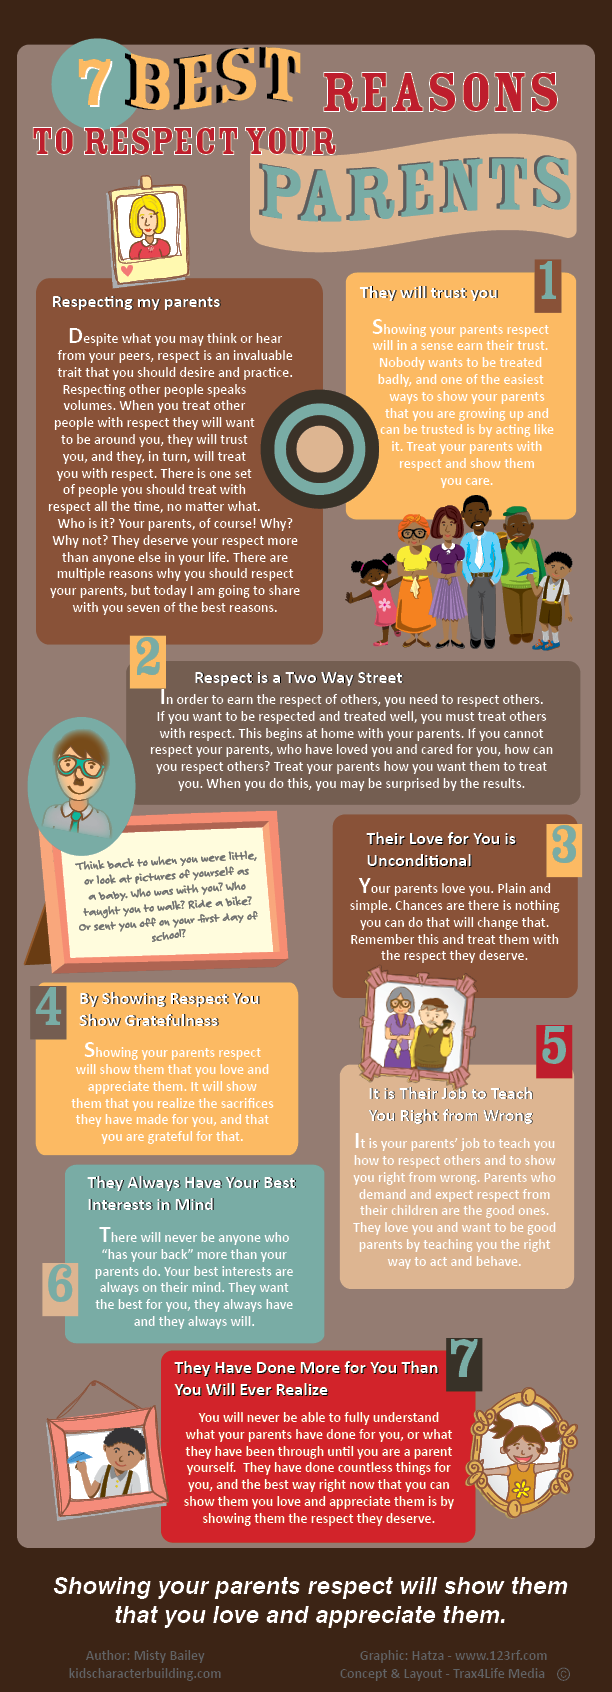 respecting my parents infographic